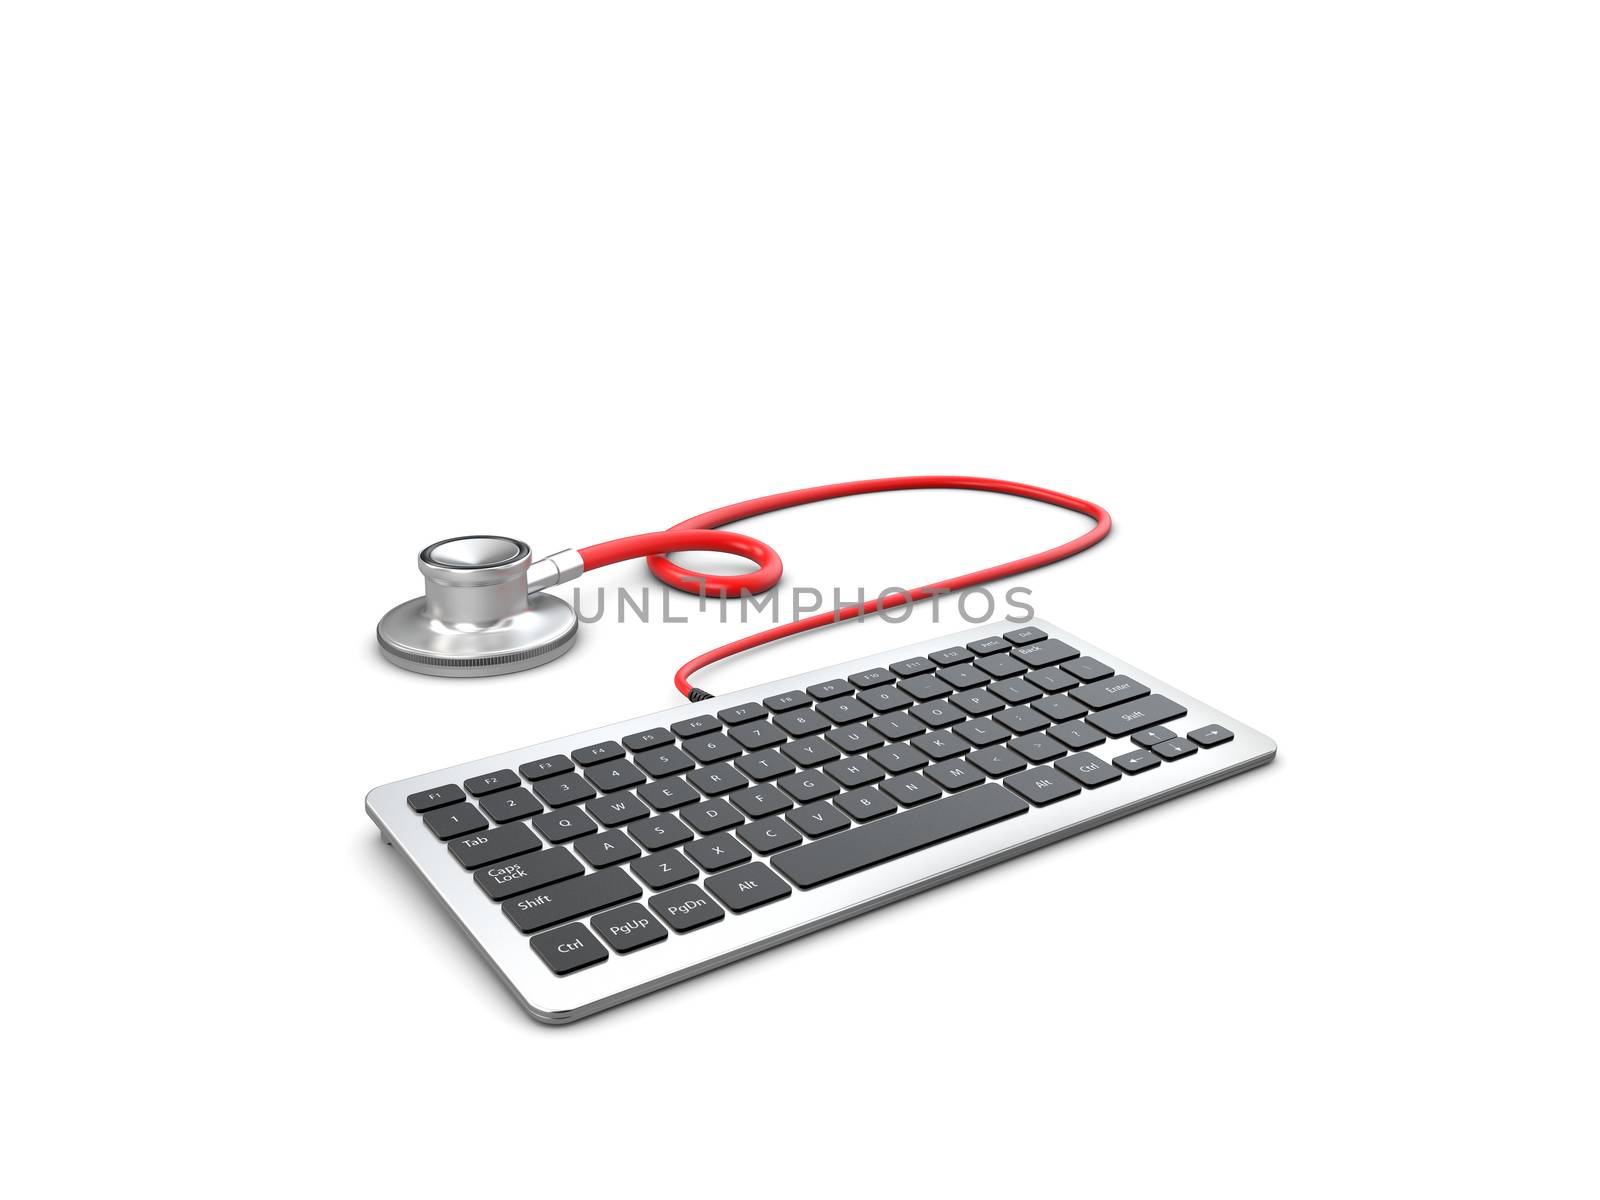 3d Illustration of Stethoscope lying with keyboard. repair concept by tussik